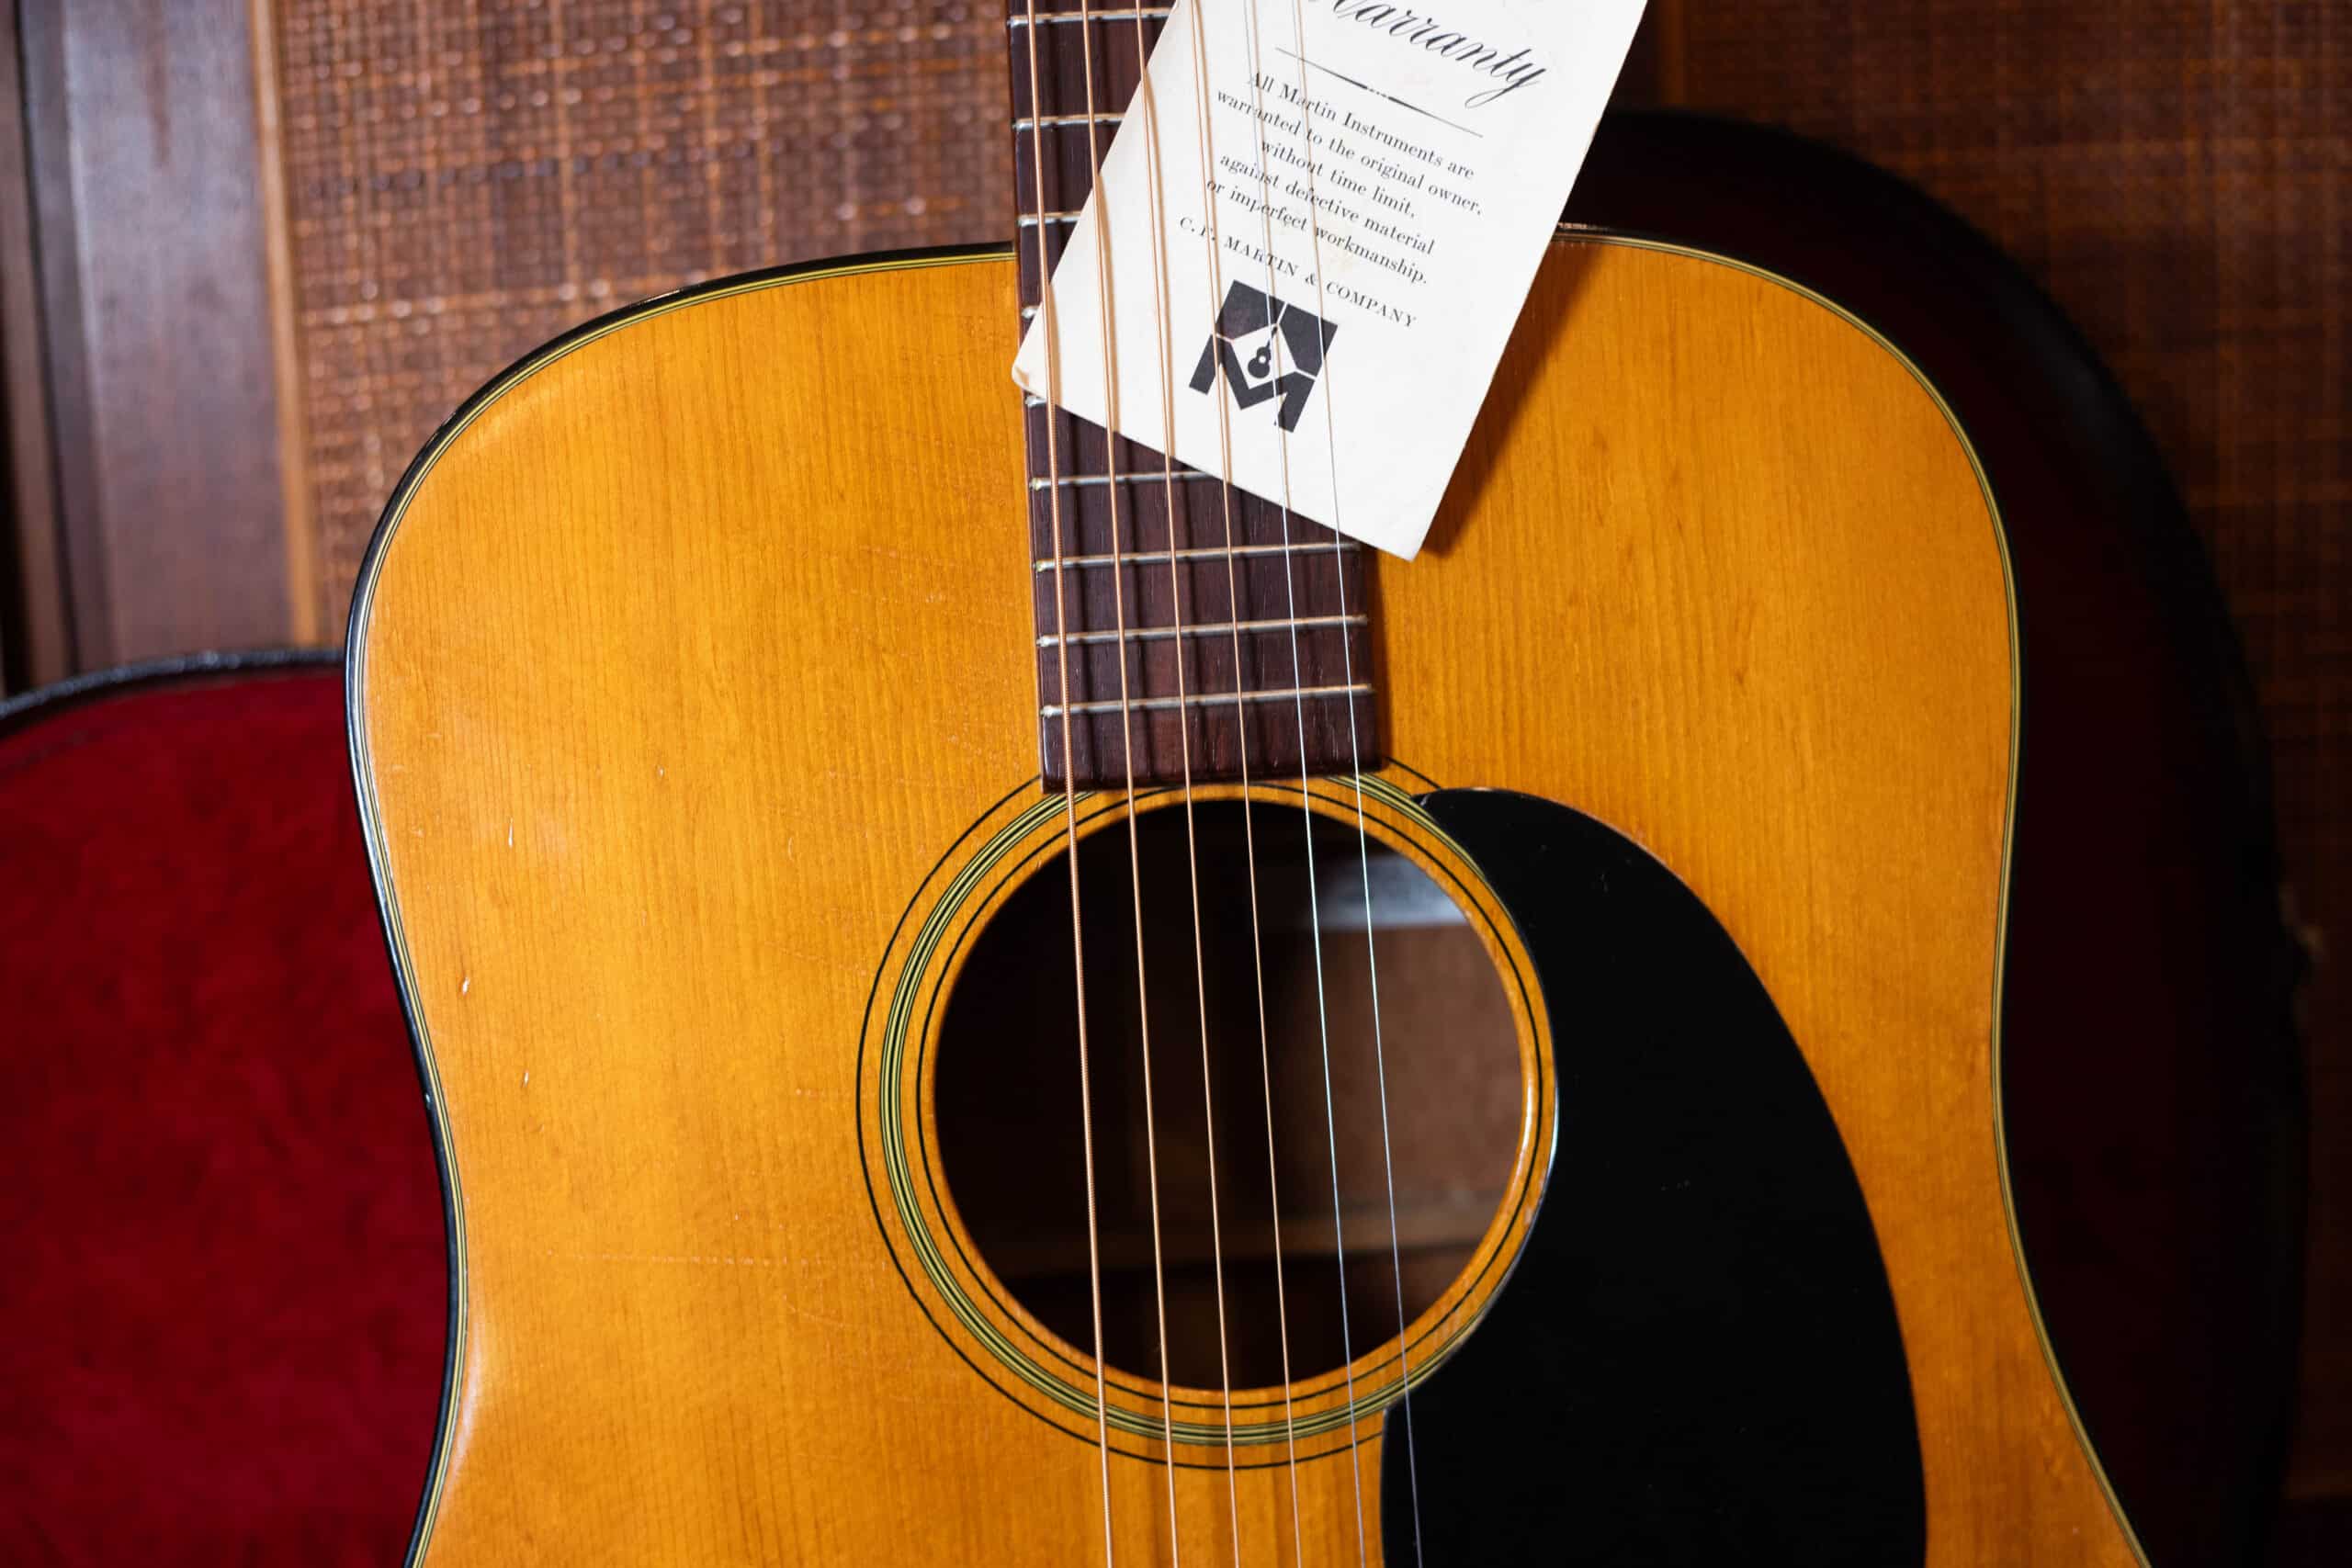 The soundhole of a 1967 Martin D-18.